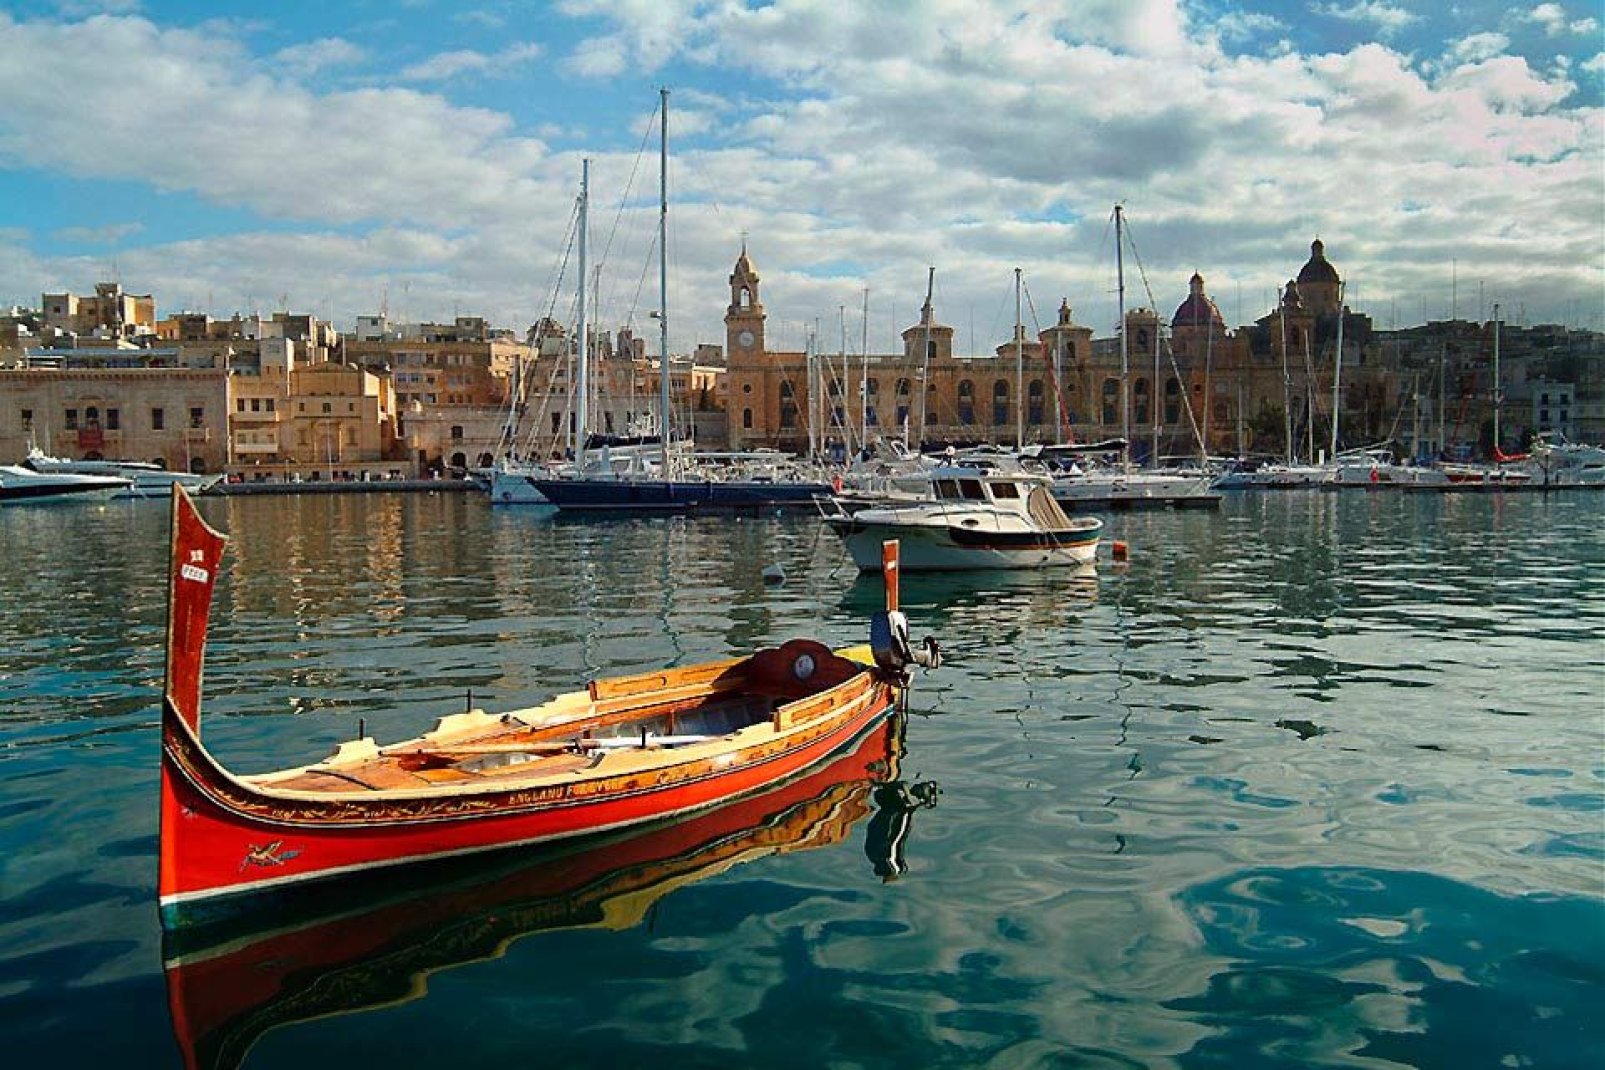 Valletta was built around its two main harbours, Marsamxett and the Grand Port.